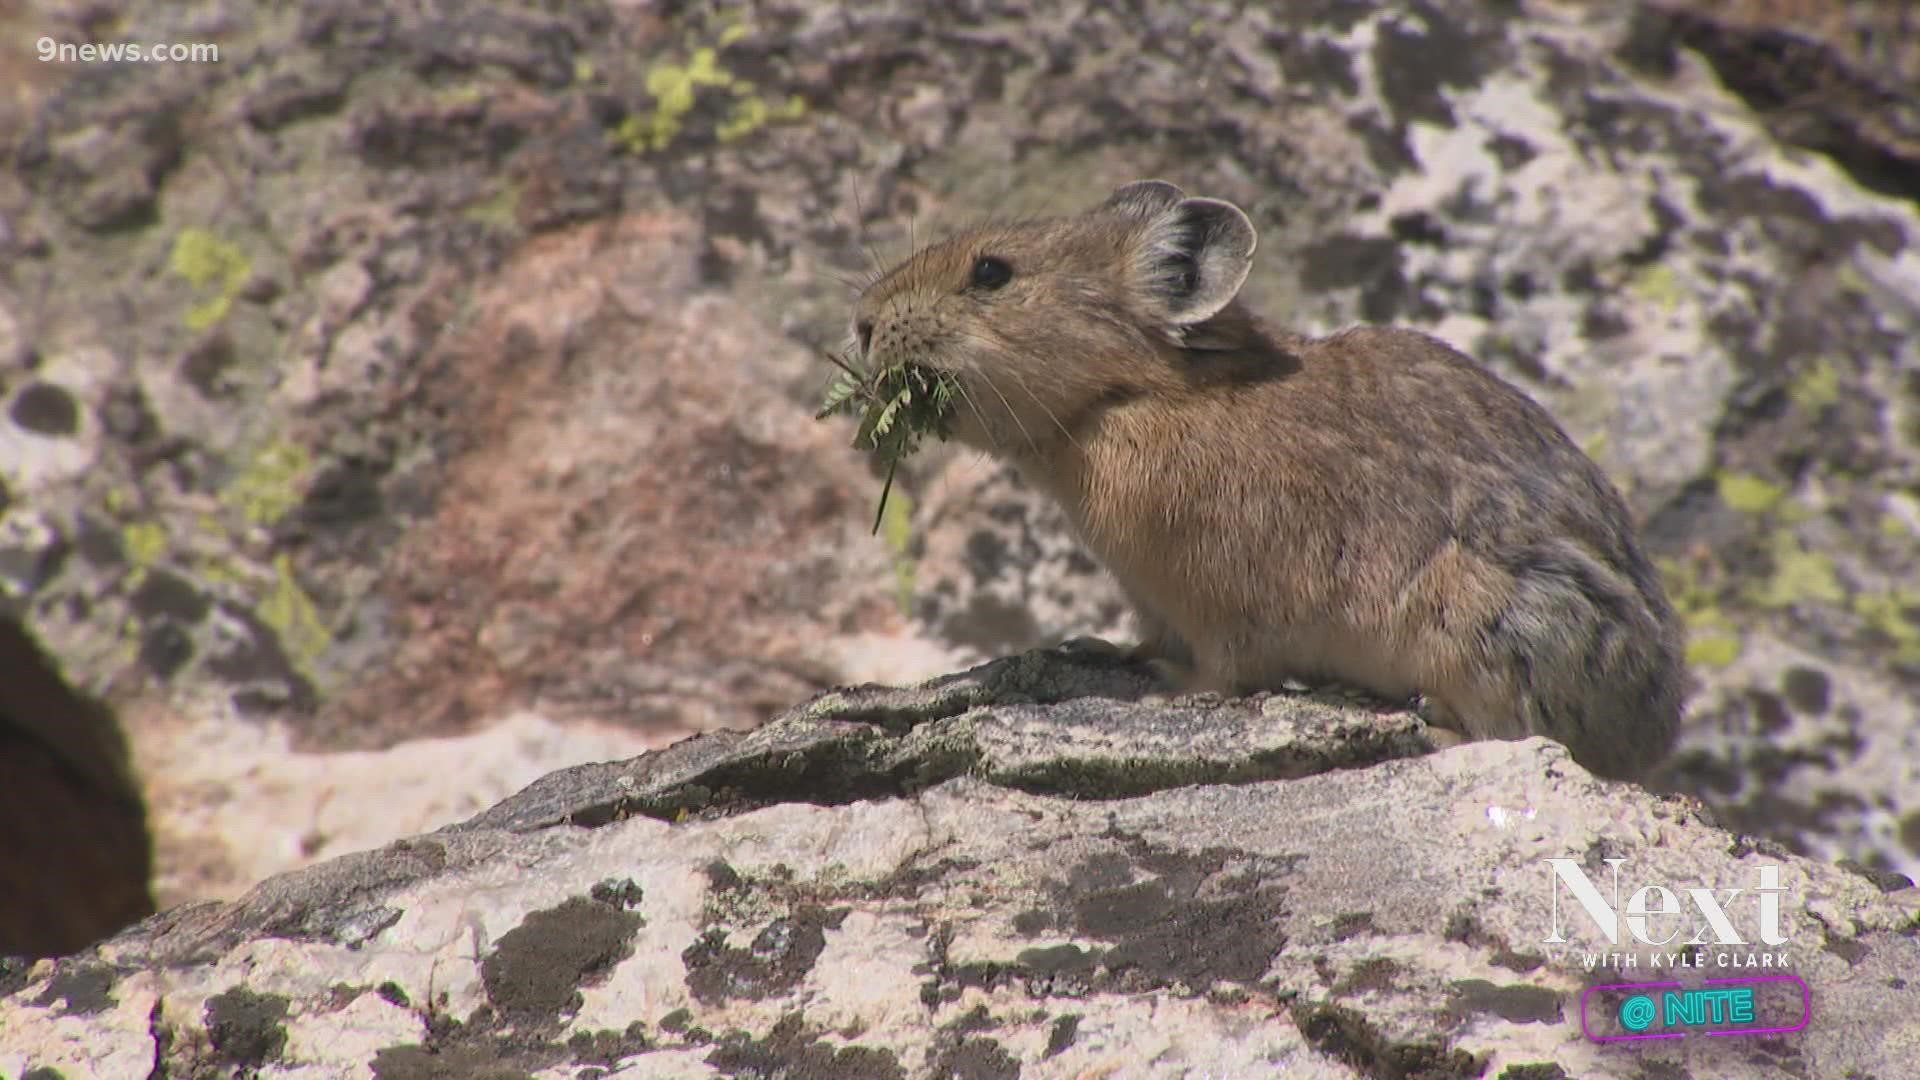 Volunteers are helping scientists monitor pika populations in Colorado. Some projections say the tiny mammals could disappear from the state by 2100 as temps rise.